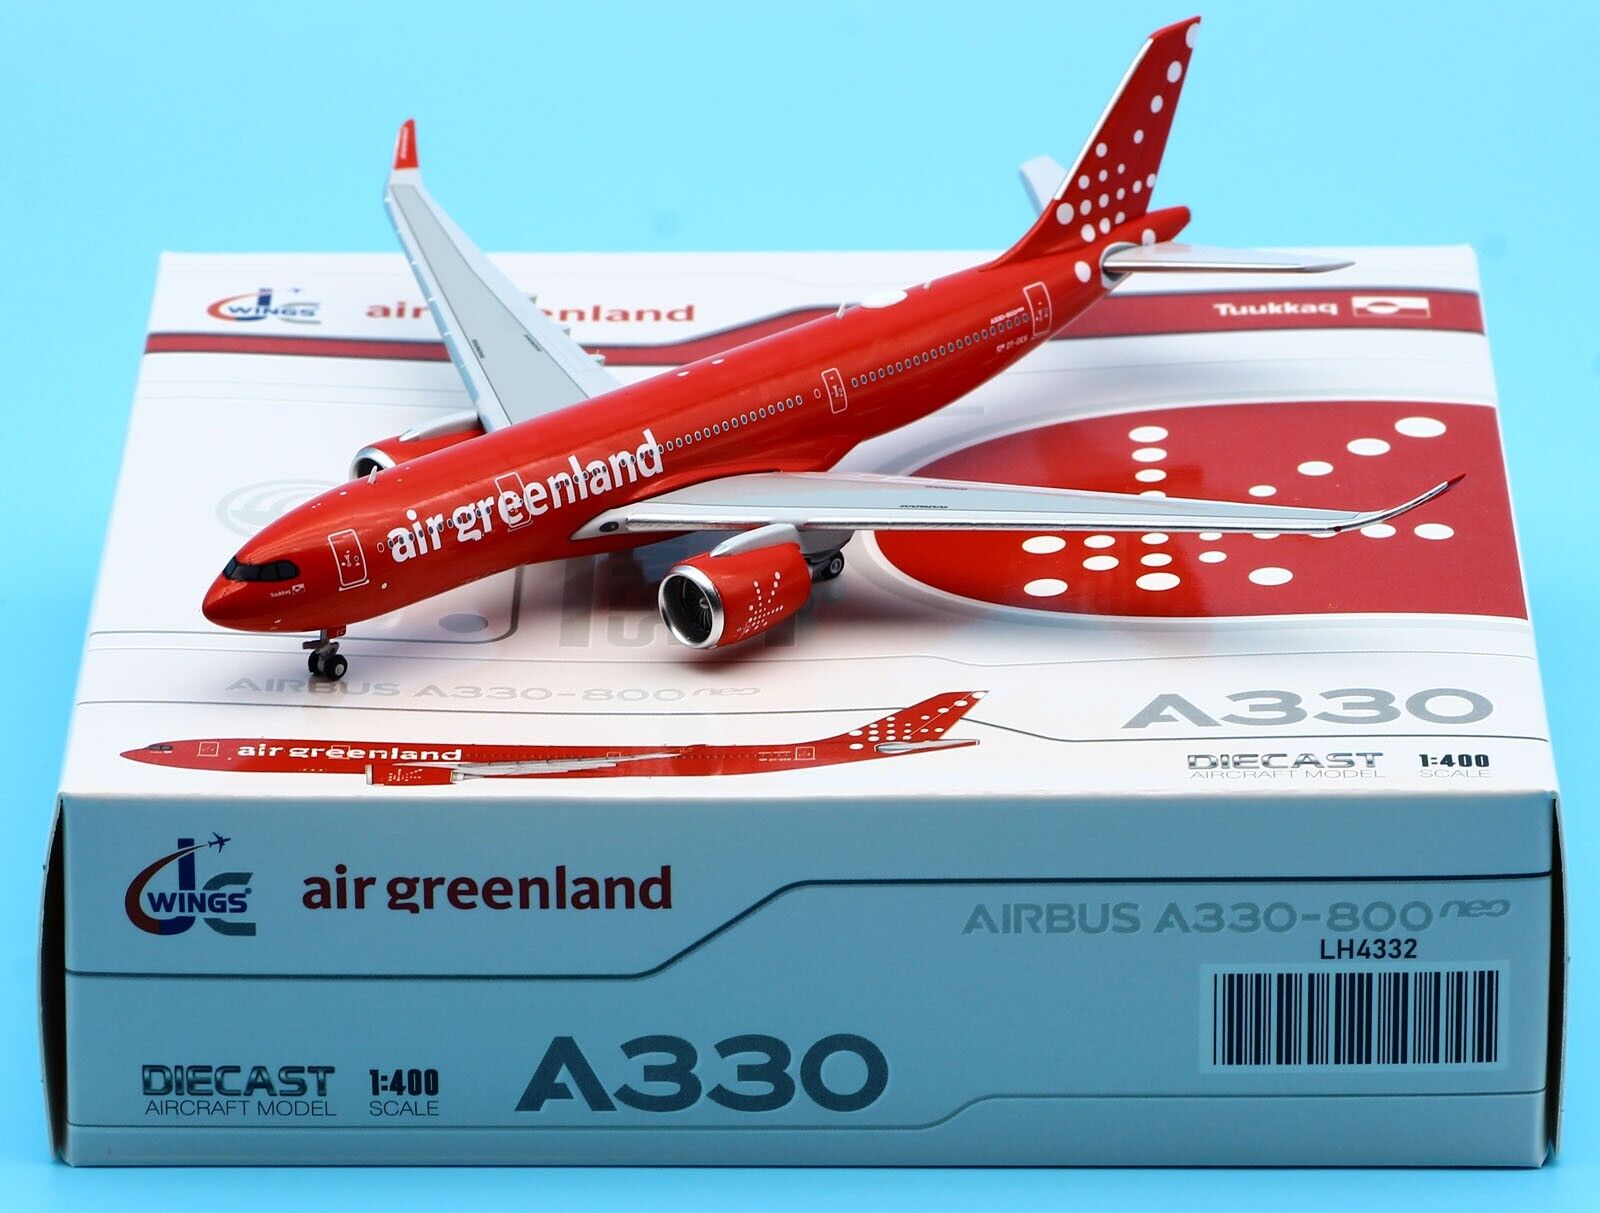 JC Wings 1:400 Air Greenland Airbus A330-800 Diecast Aircraft Model OY-GKN